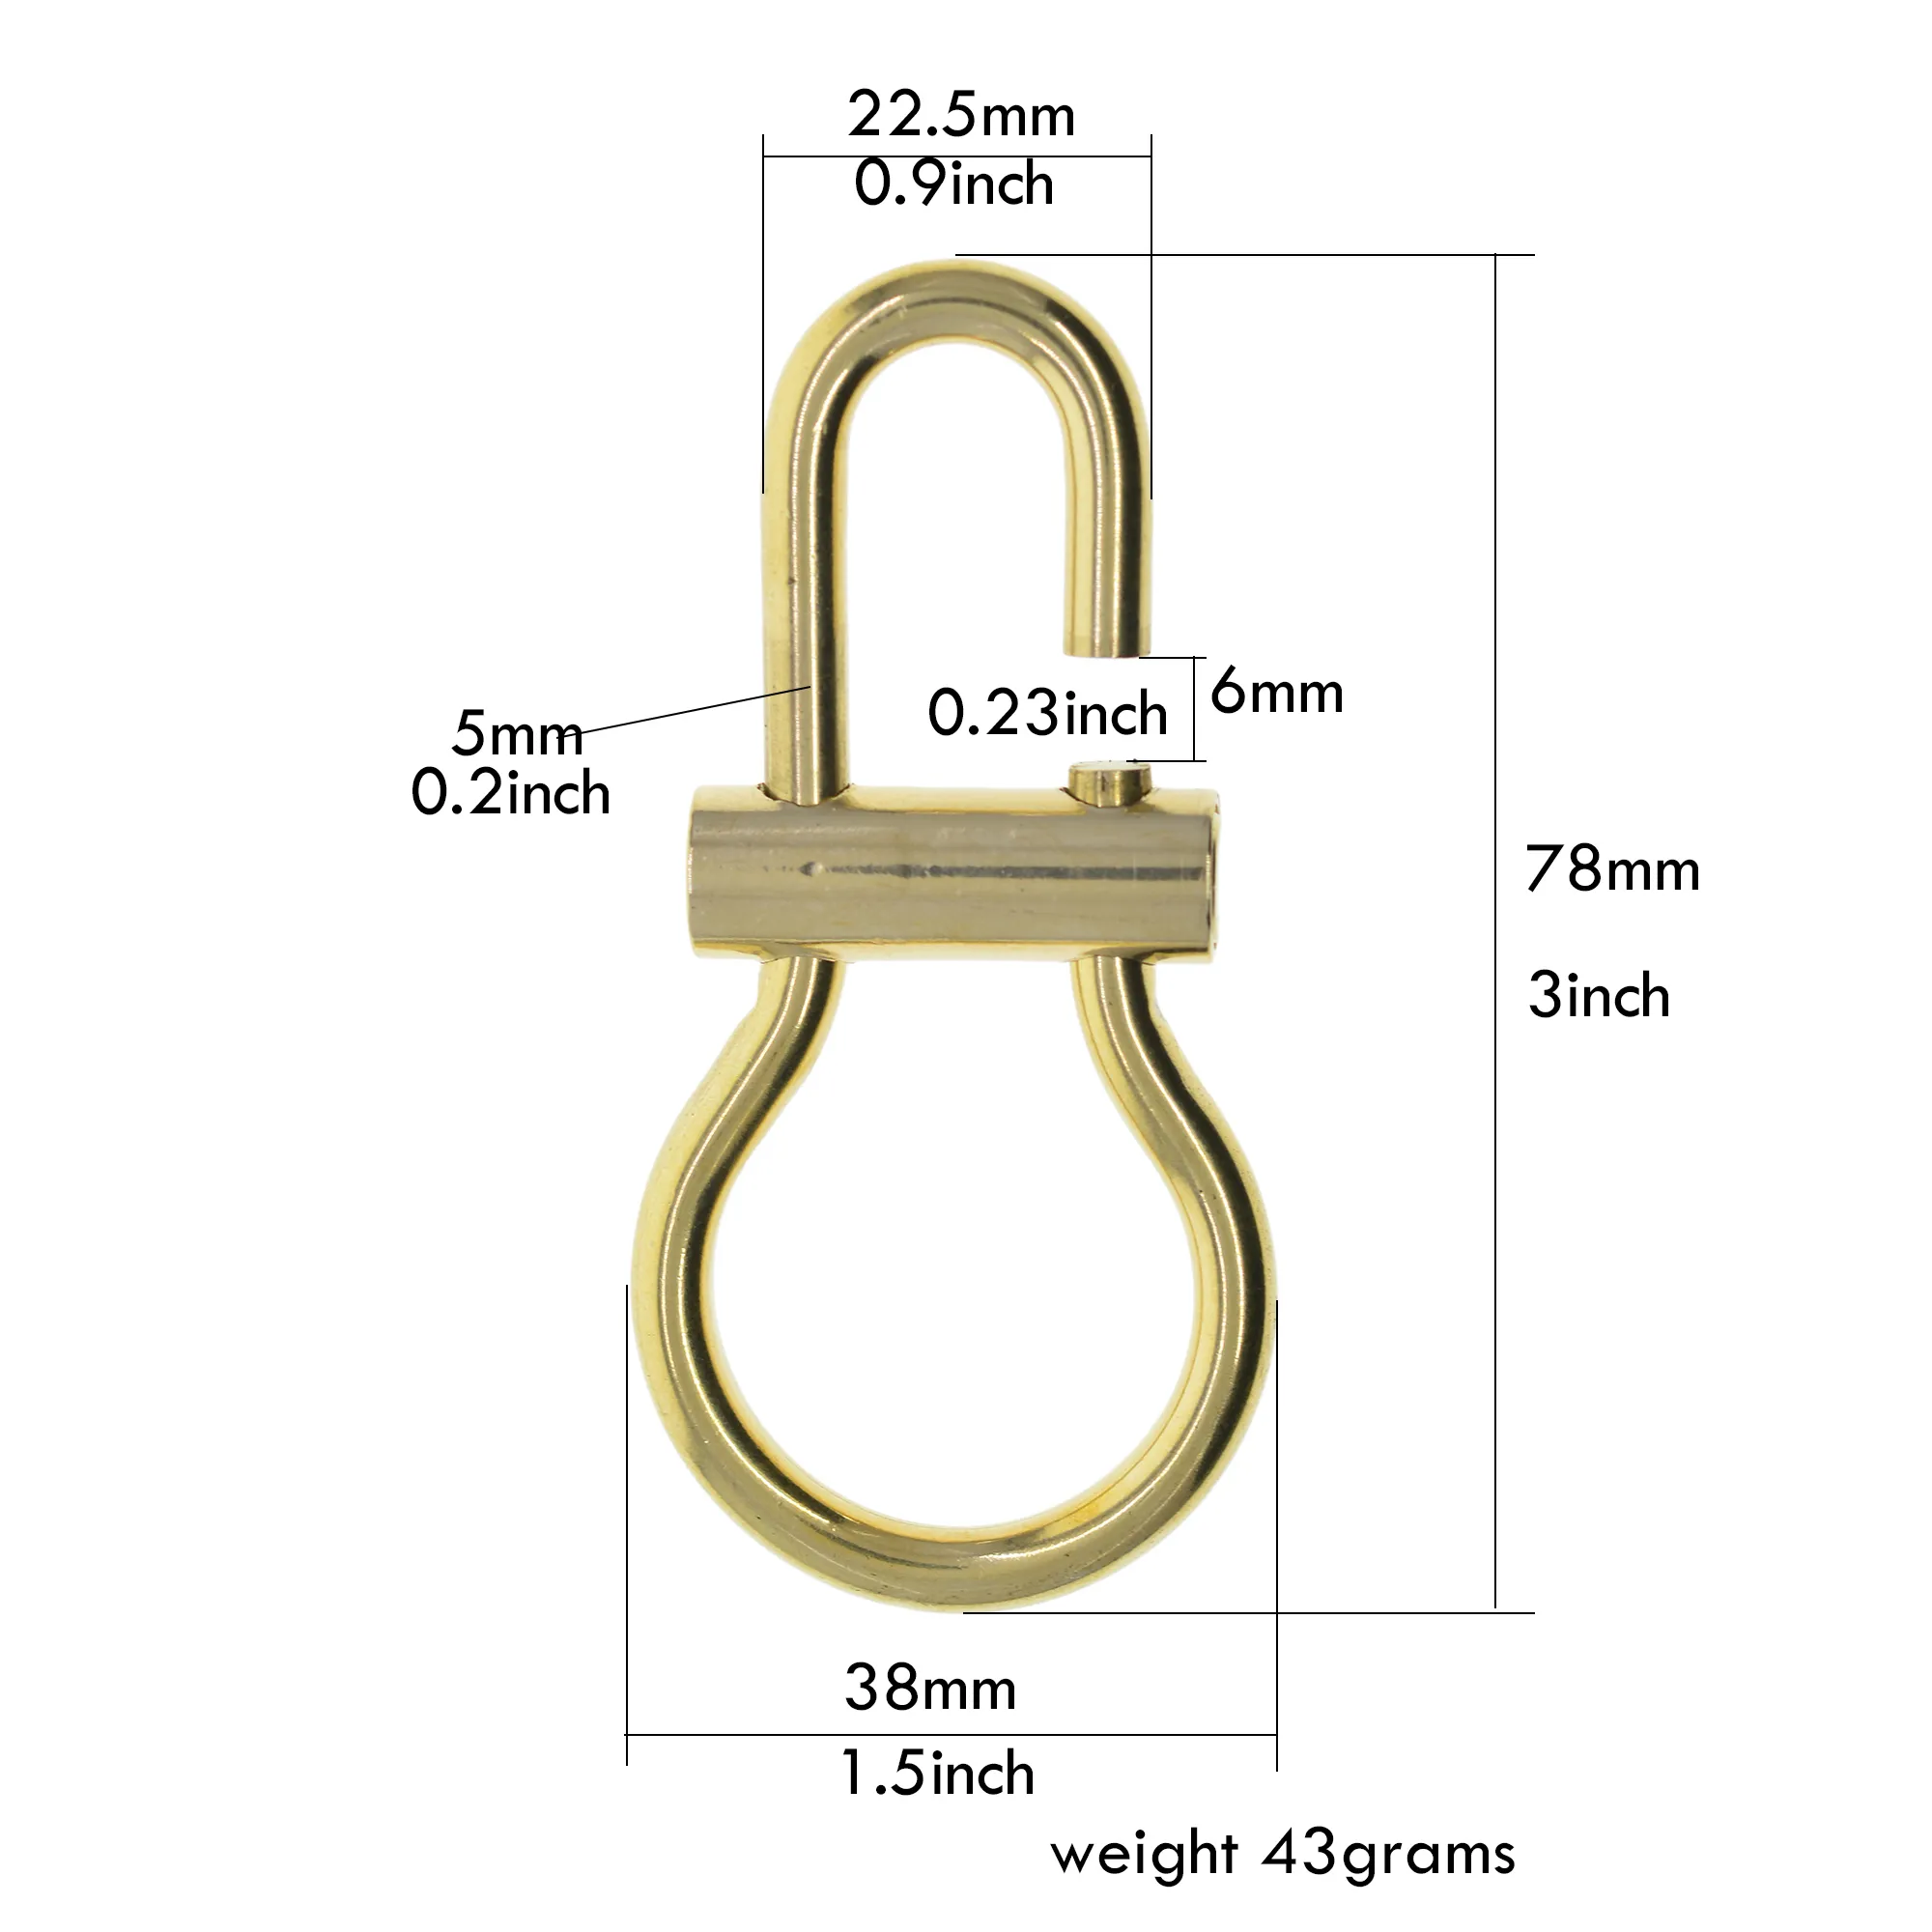 Key Rings Super strong Solid Mirror polished brass Oval bulb spring Round snap slide Locking clip lock Carabiner keychains FOB